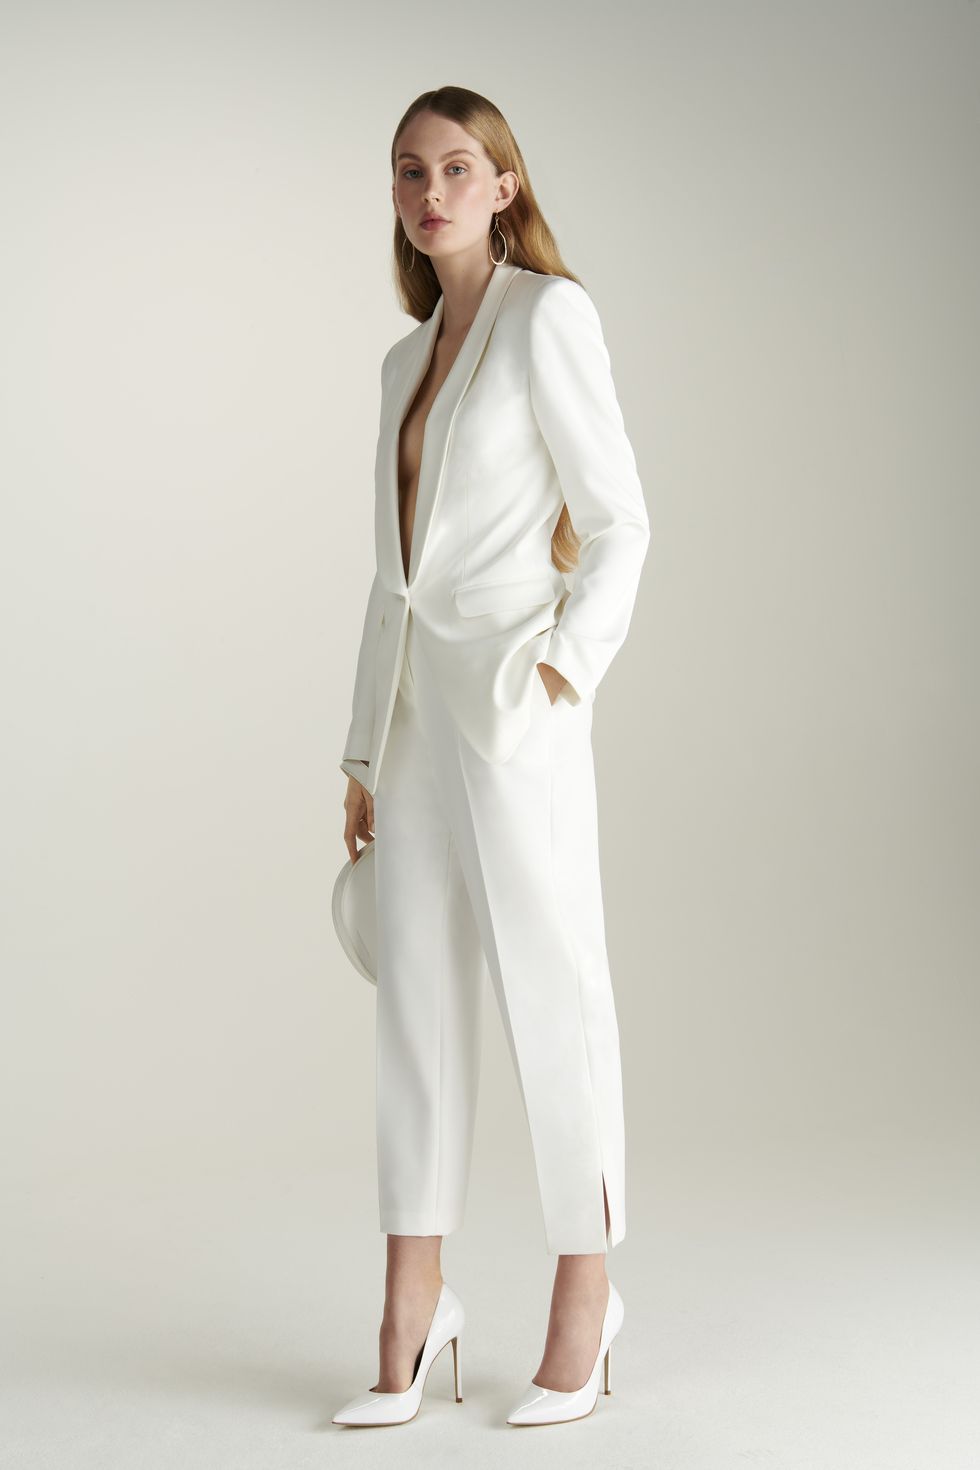 Clothing, White, Fashion model, Fashion, Robe, Formal wear, Outerwear, Shoulder, Suit, Neck, 